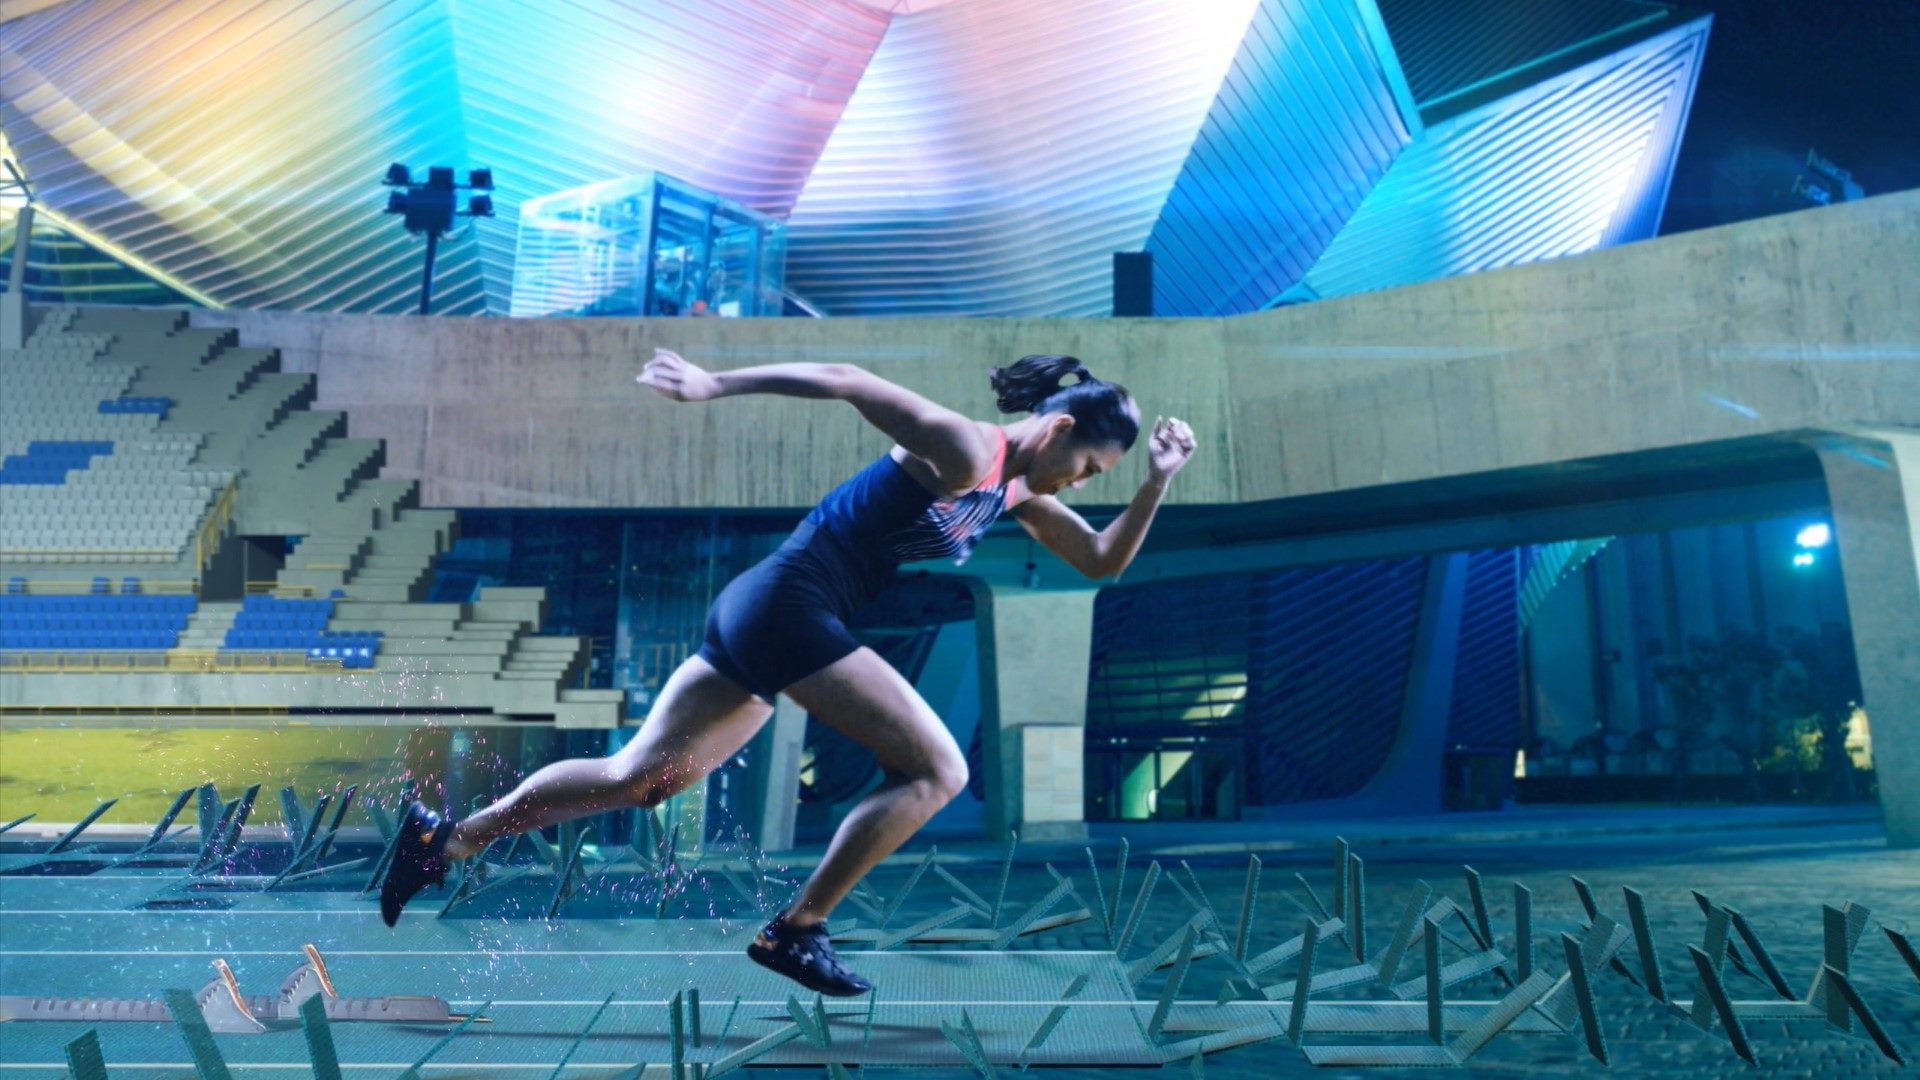 The Taipei Universiade promotional video "Taipei in Motion" won the 2017 German Red Dot Design Award. (Photo / Provided by the Taipei City Government)